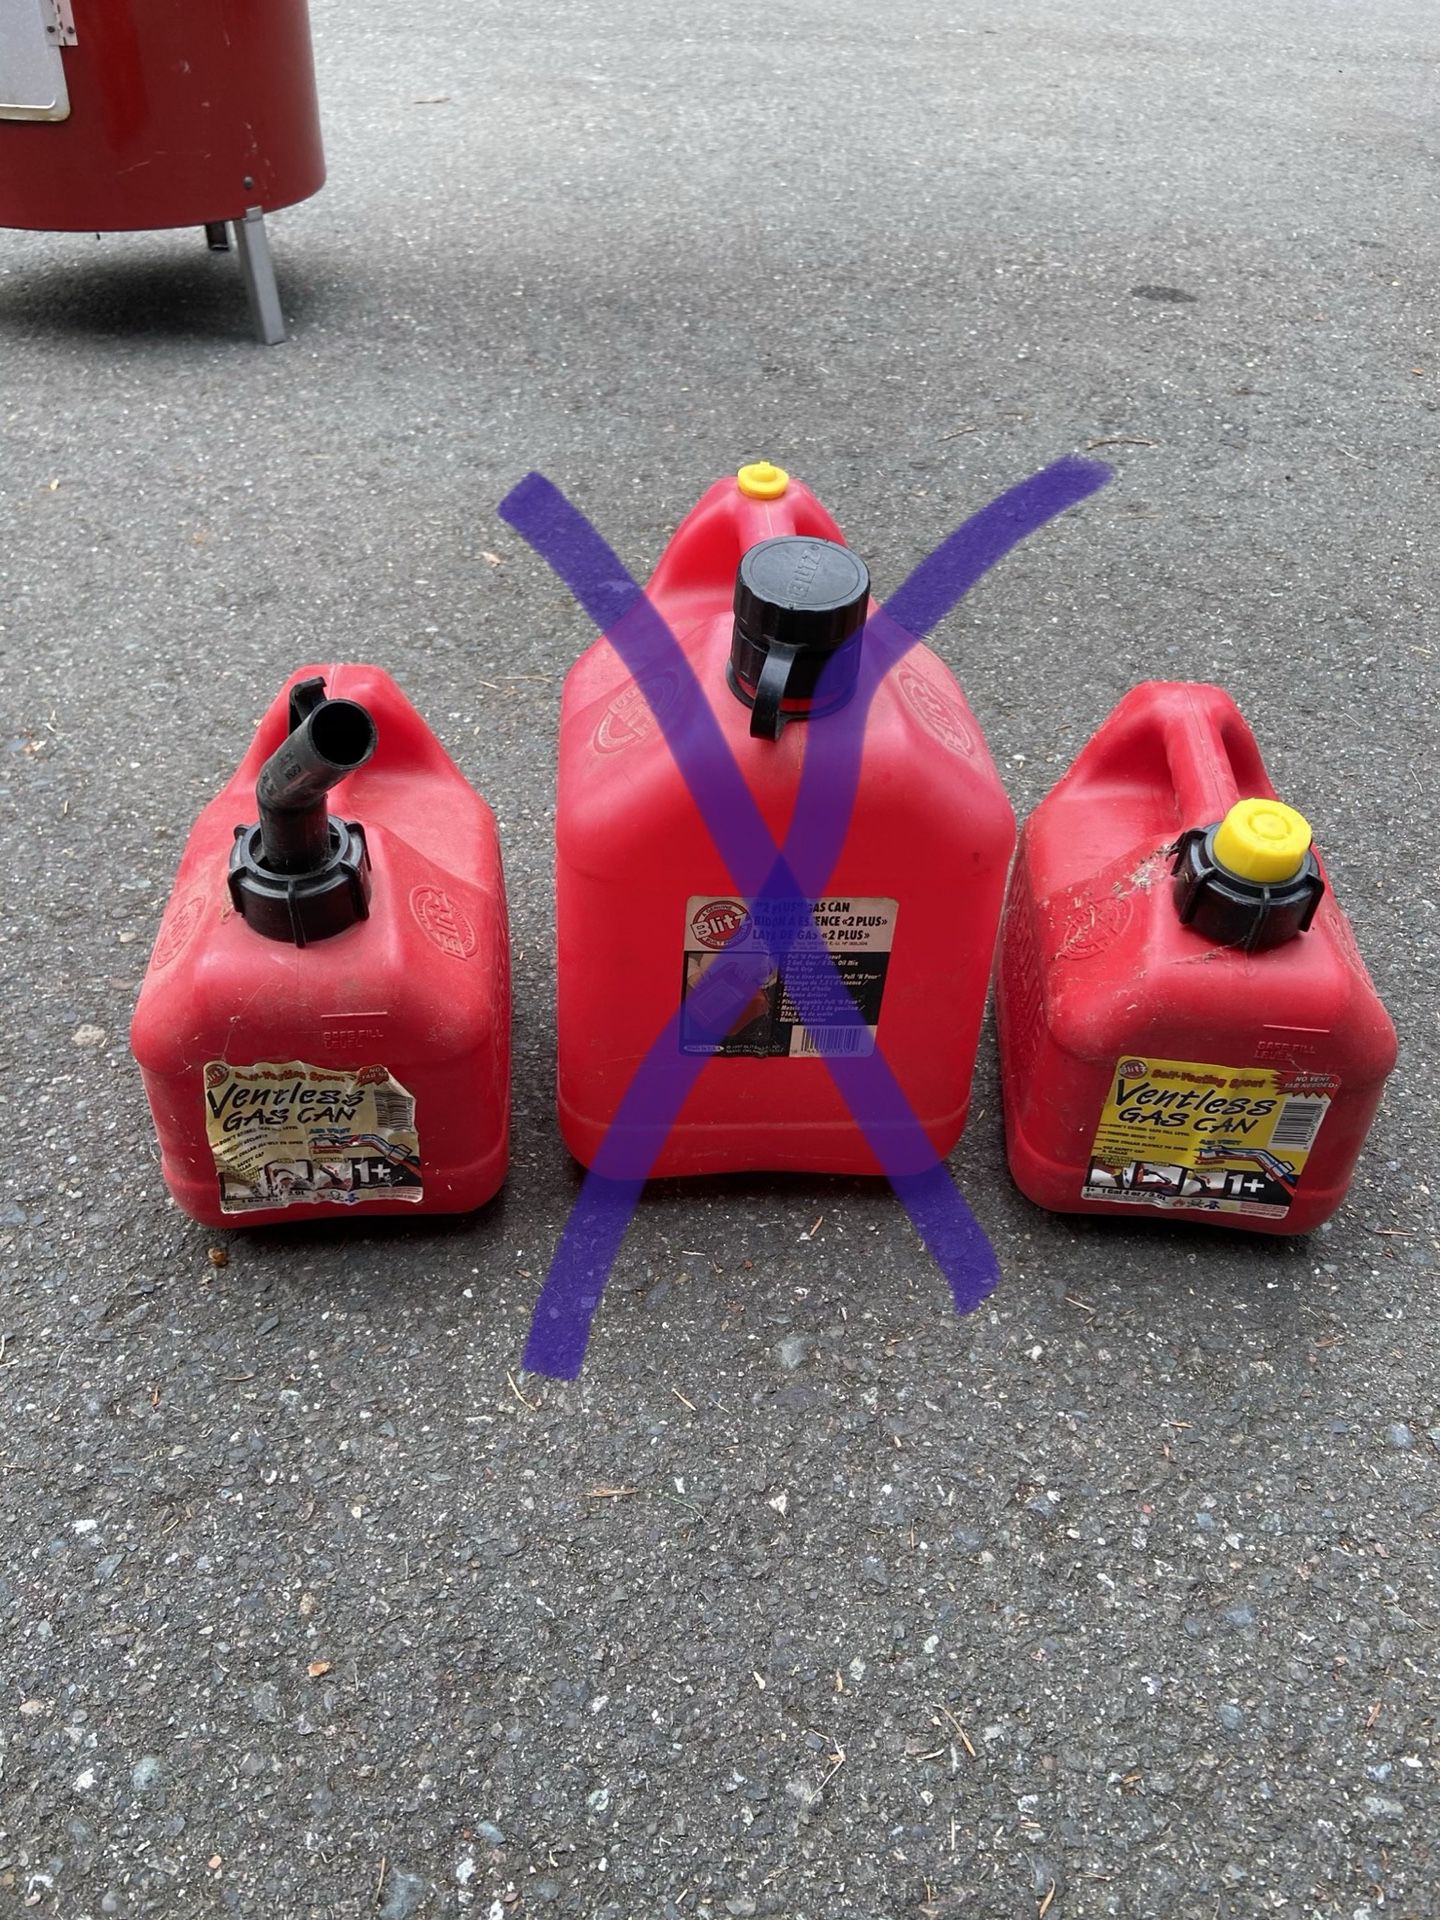 Two small gas cans $10 for both